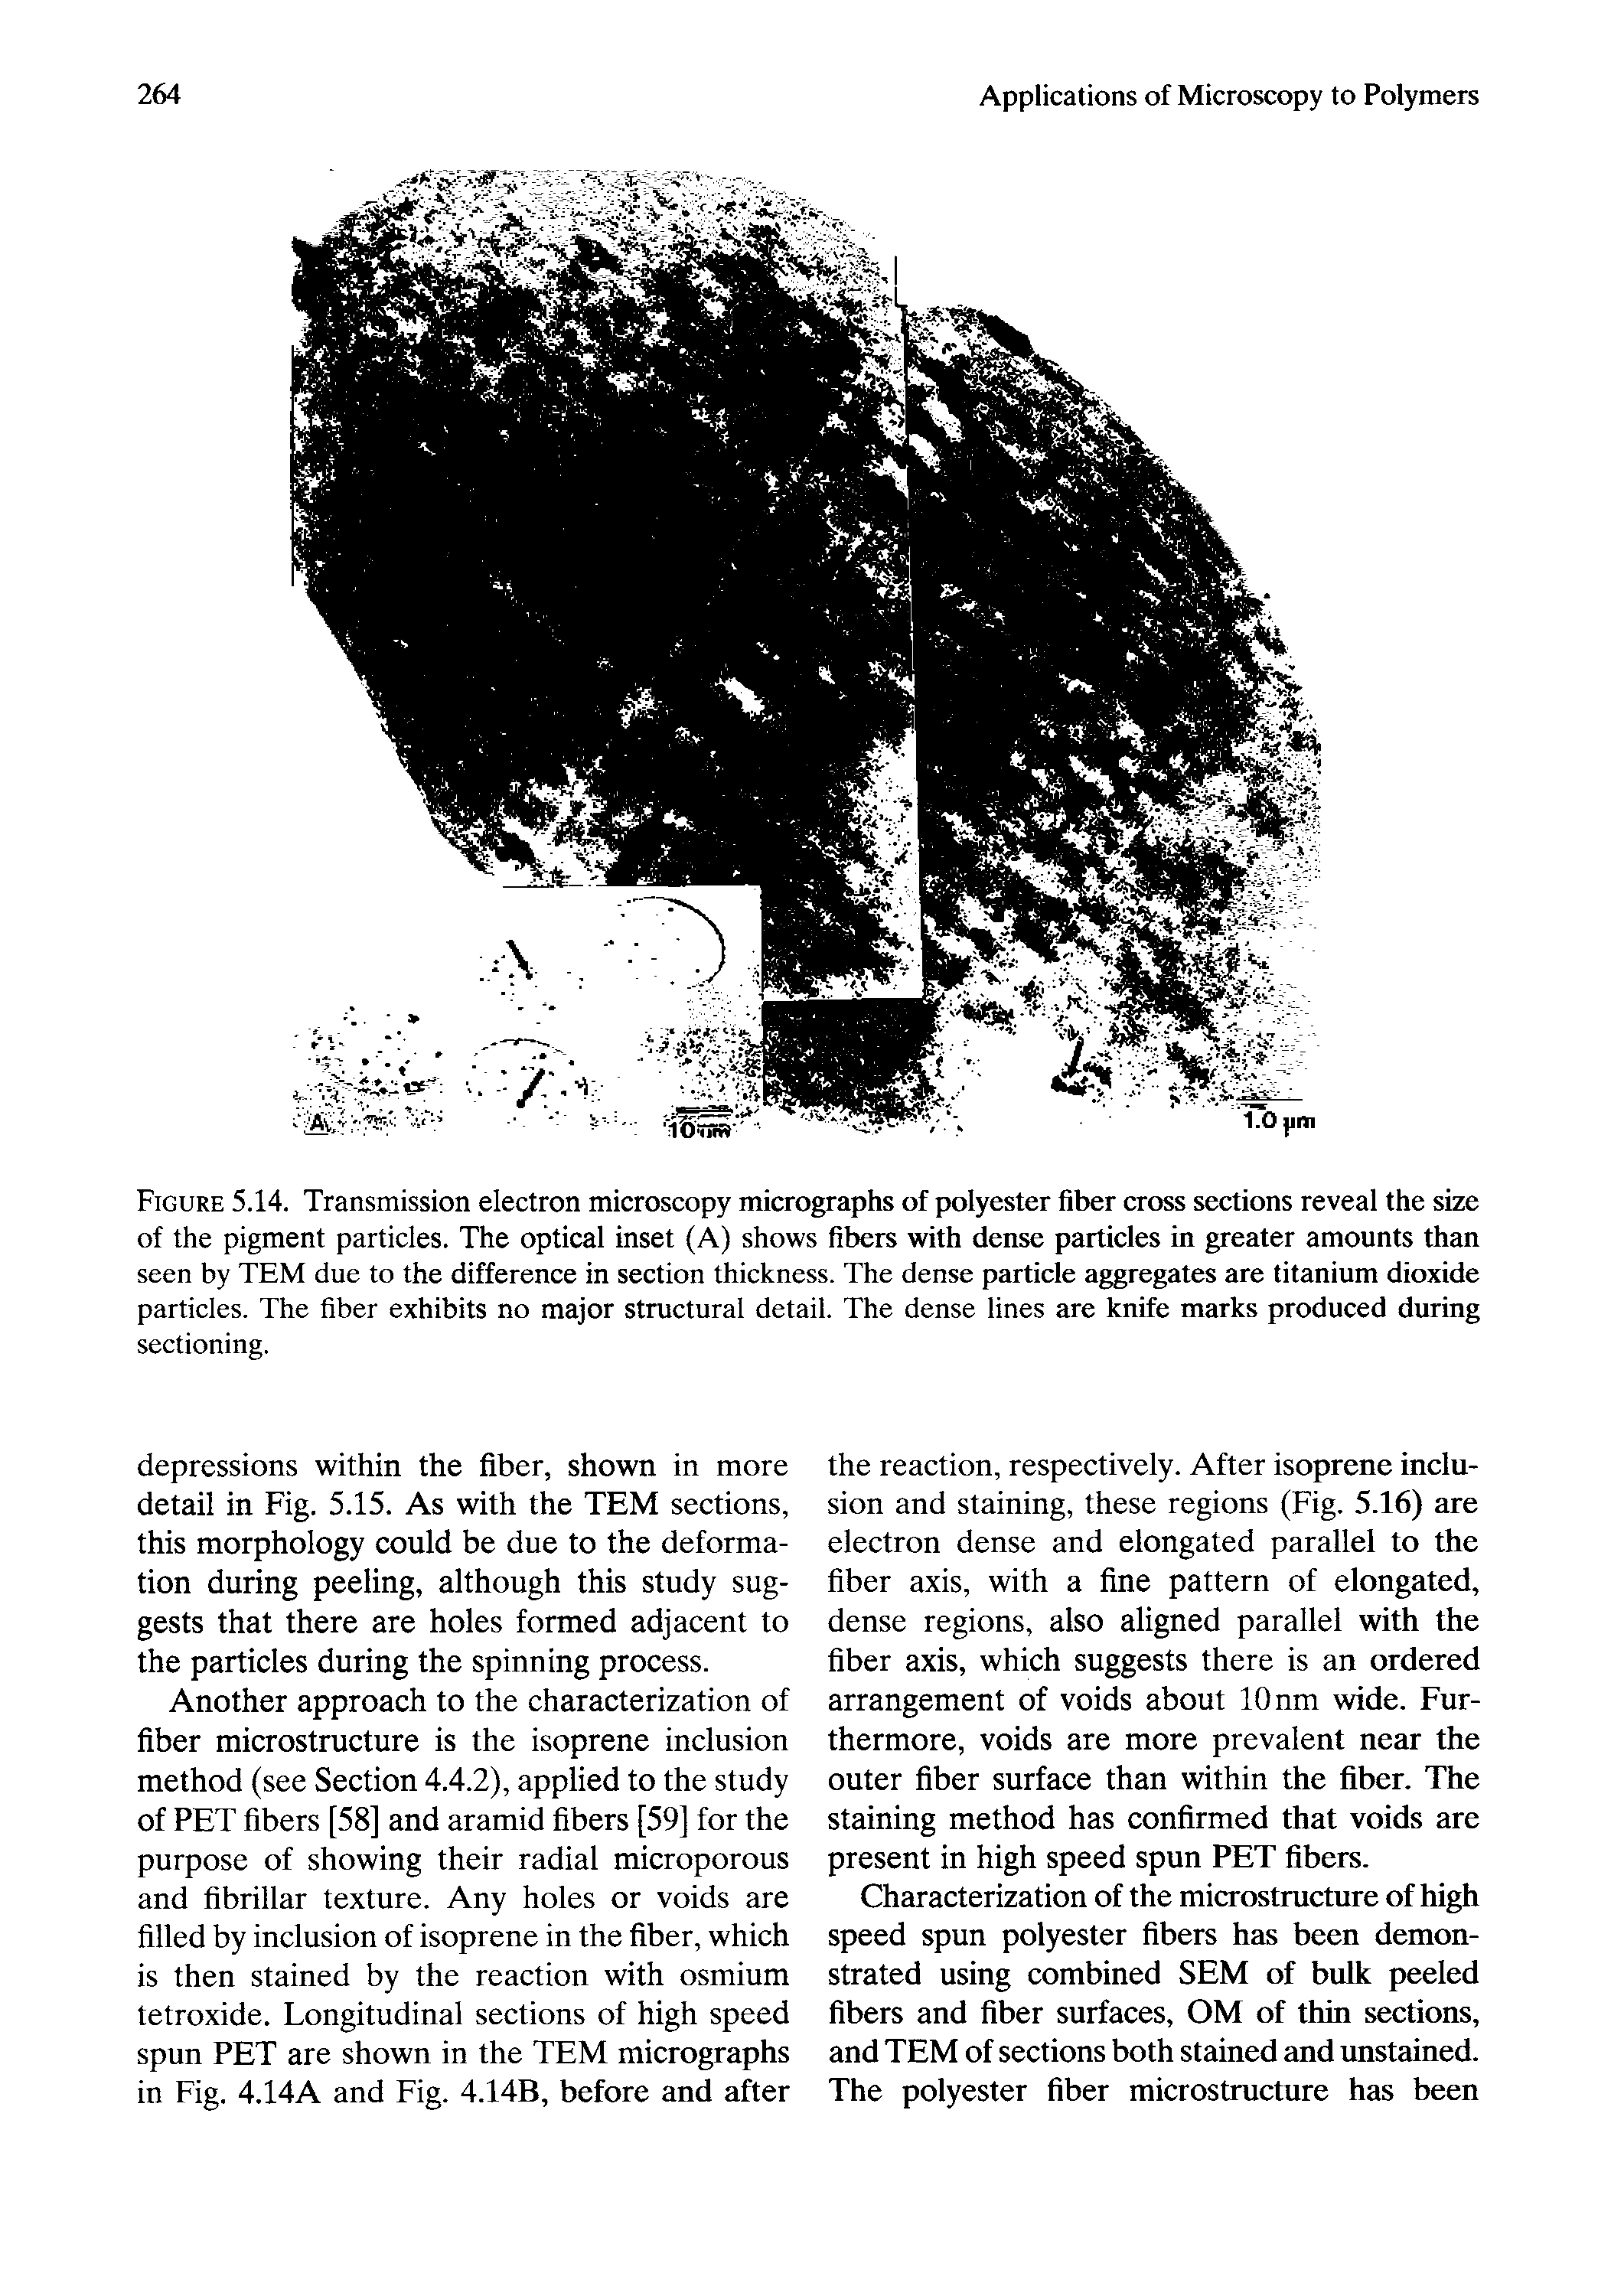 Figure 5.14. Transmission electron microscopy micrographs of p)olyester fiber cross sections reveal the size of the pigment particles. The optical inset (A) shows fibers with dense particles in greater amounts than seen by TEM due to the difference in section thickness. The dense particle aggregates are titanium dioxide particles. The fiber exhibits no major structural detail. The dense lines are knife marks produced during...